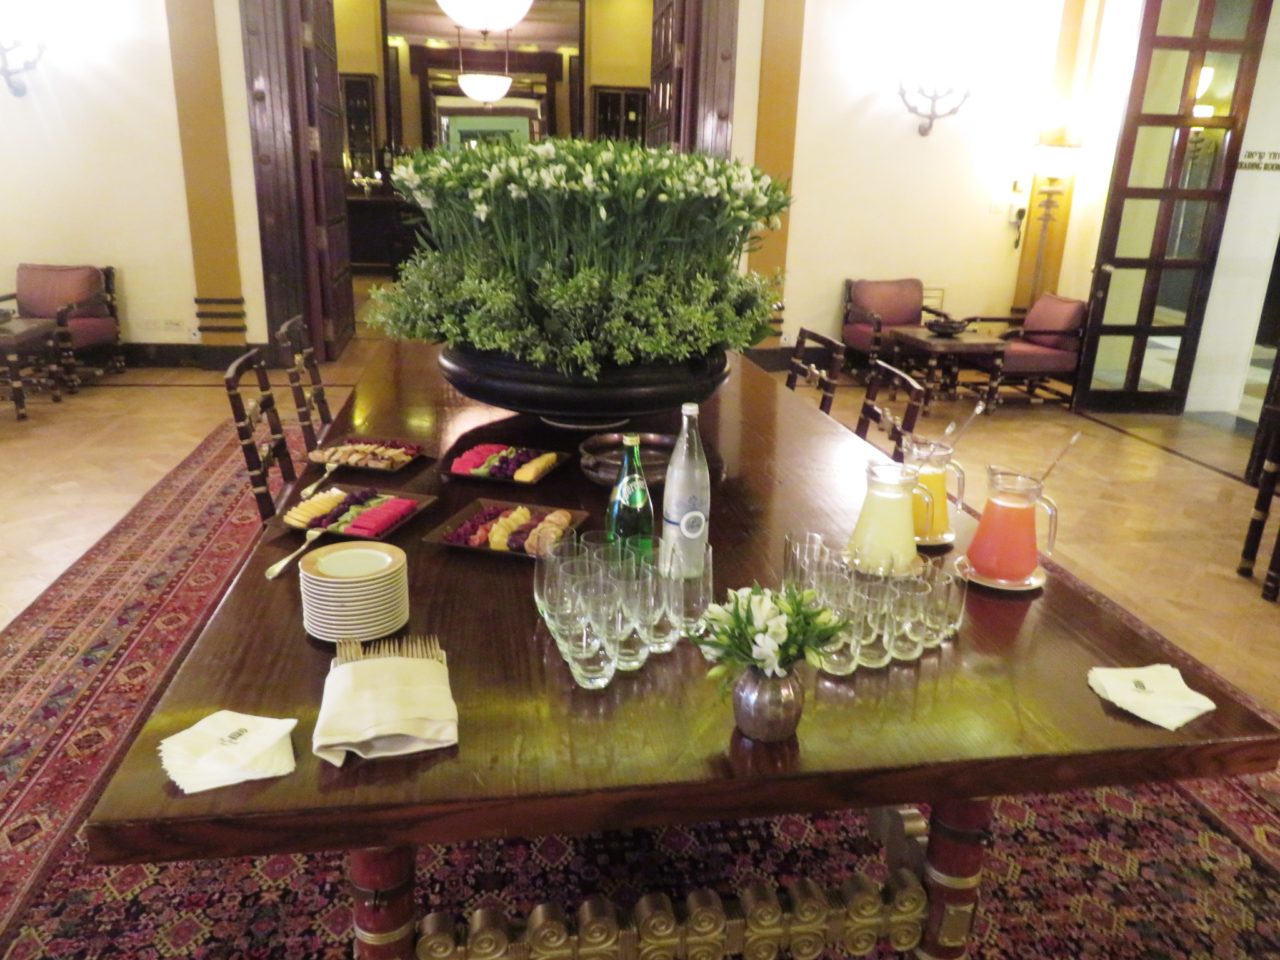 King David Hotel, Jerusalem Israel - Light refreshments in the Reading Room ... on the table used for signing the historic peace treaty between Israel and Jordan !